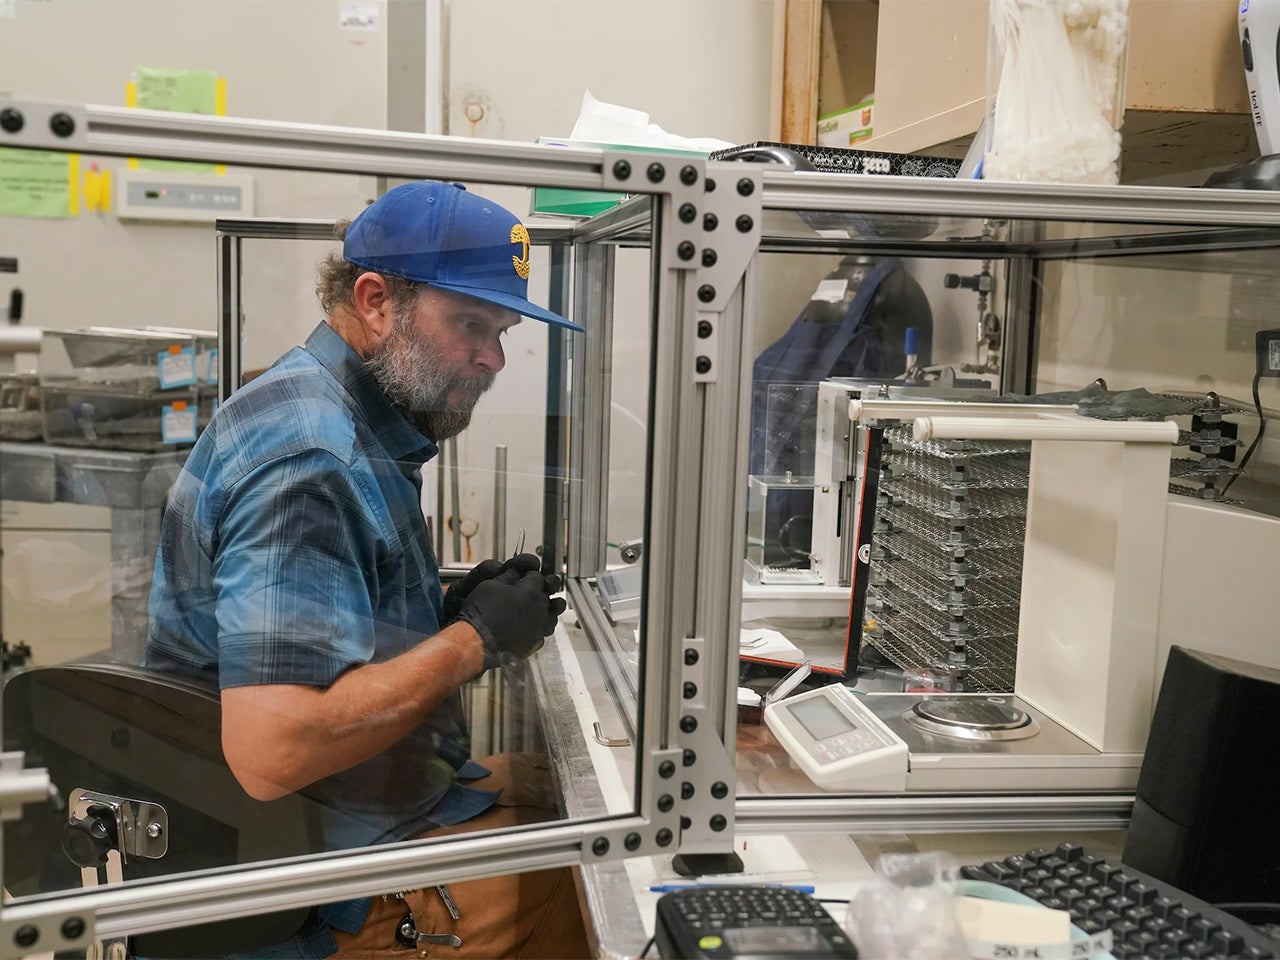 Keith Bein in a blue shirt and cap seated in lab at work on air quality research